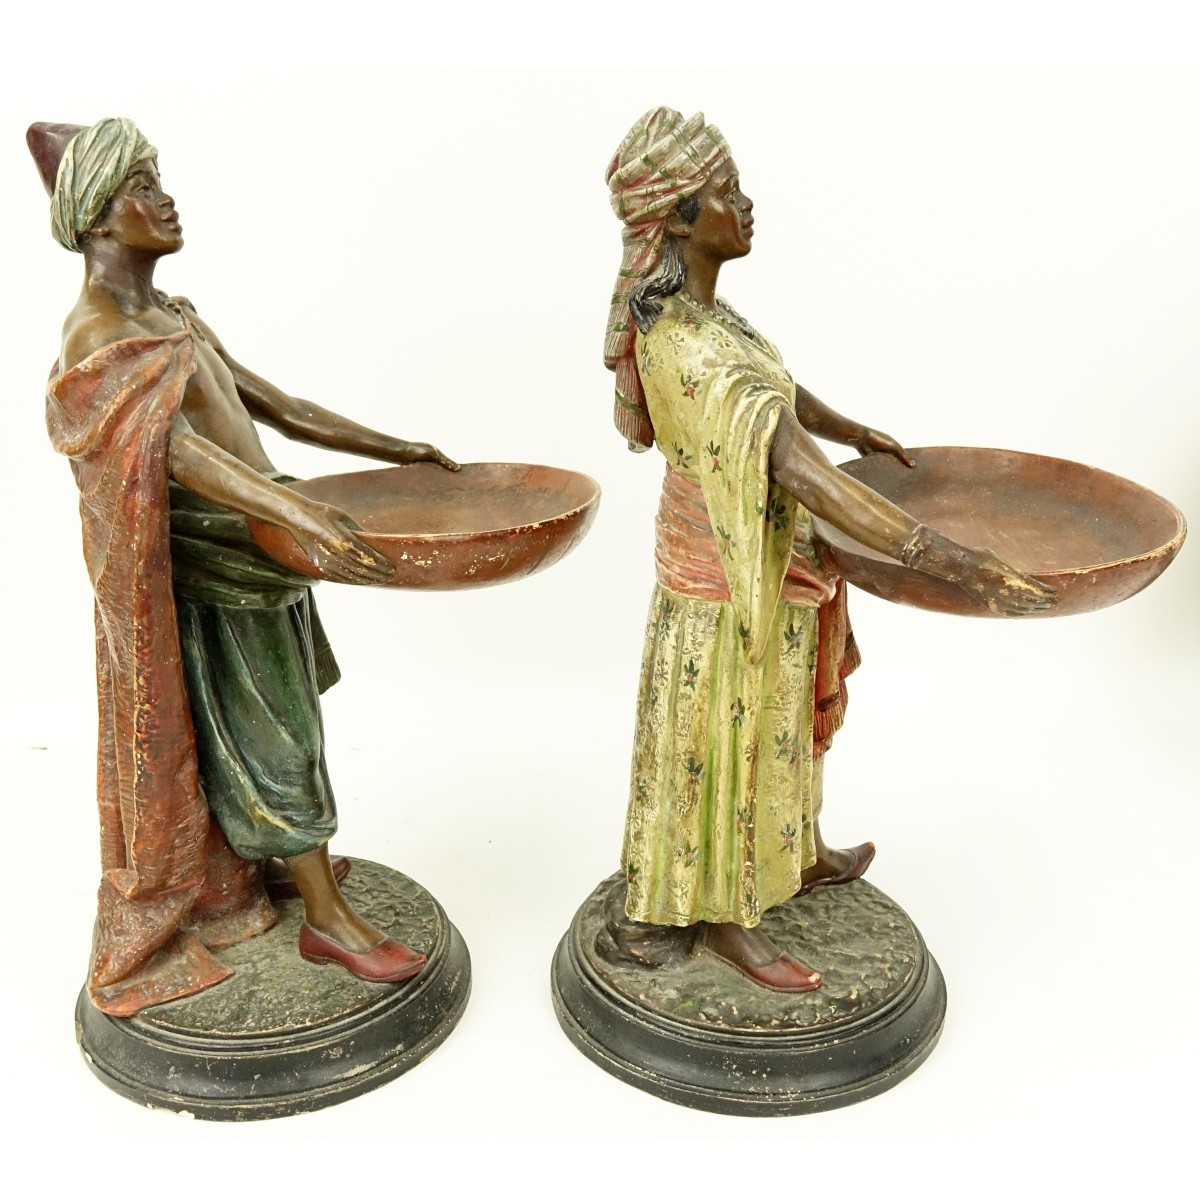 Pair of Orientalist Polychrome Pottery Figures